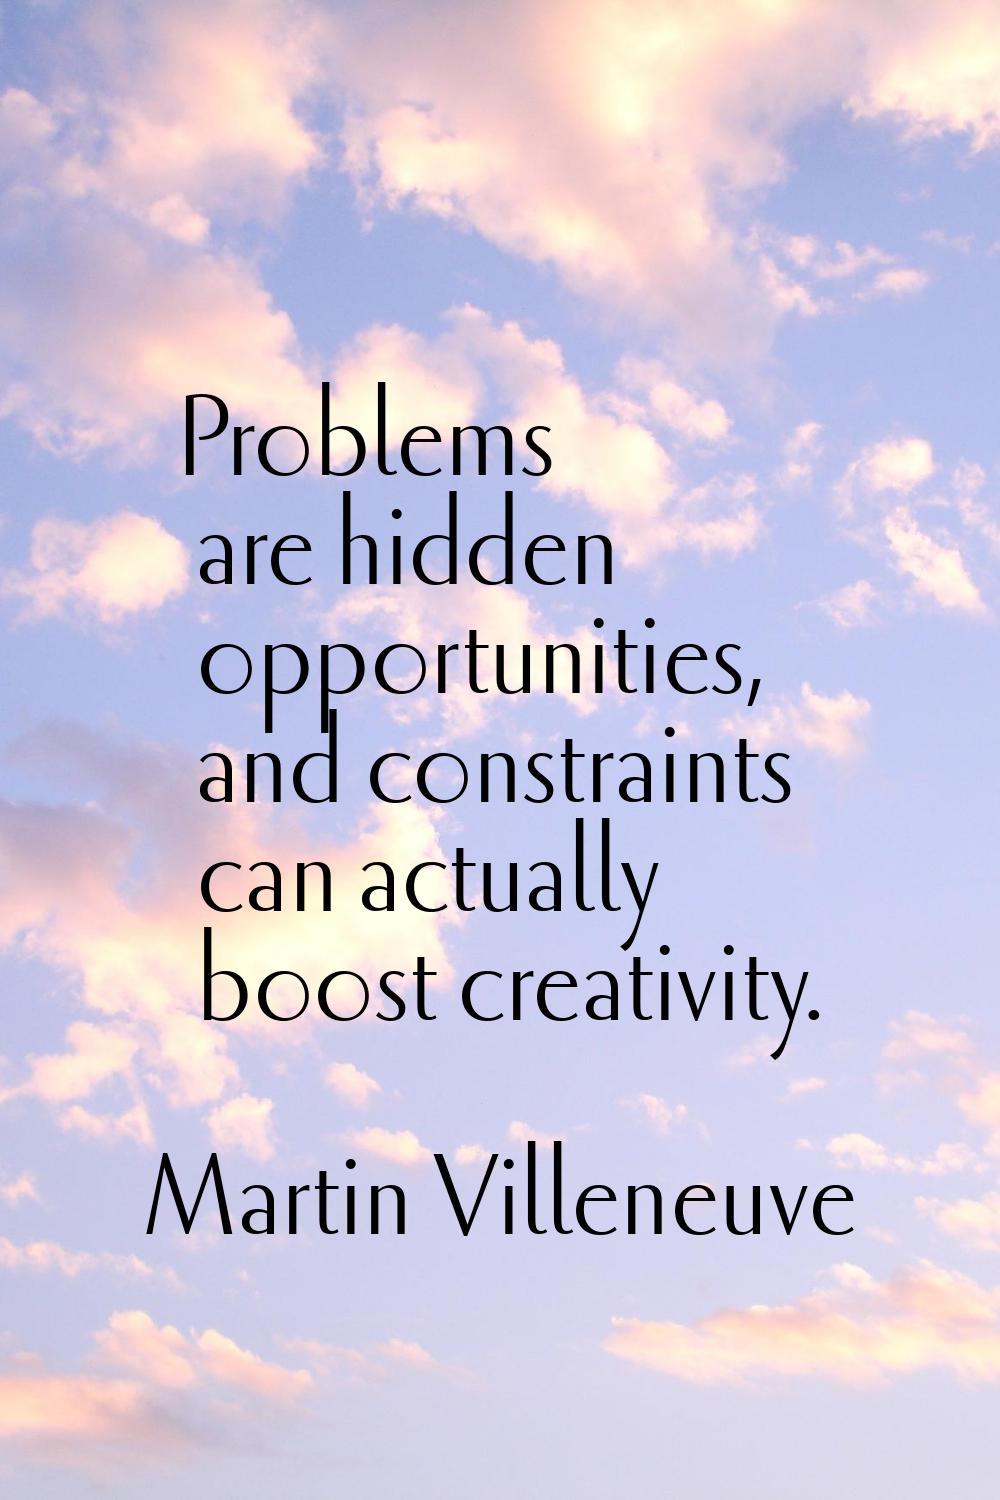 Problems are hidden opportunities, and constraints can actually boost creativity.